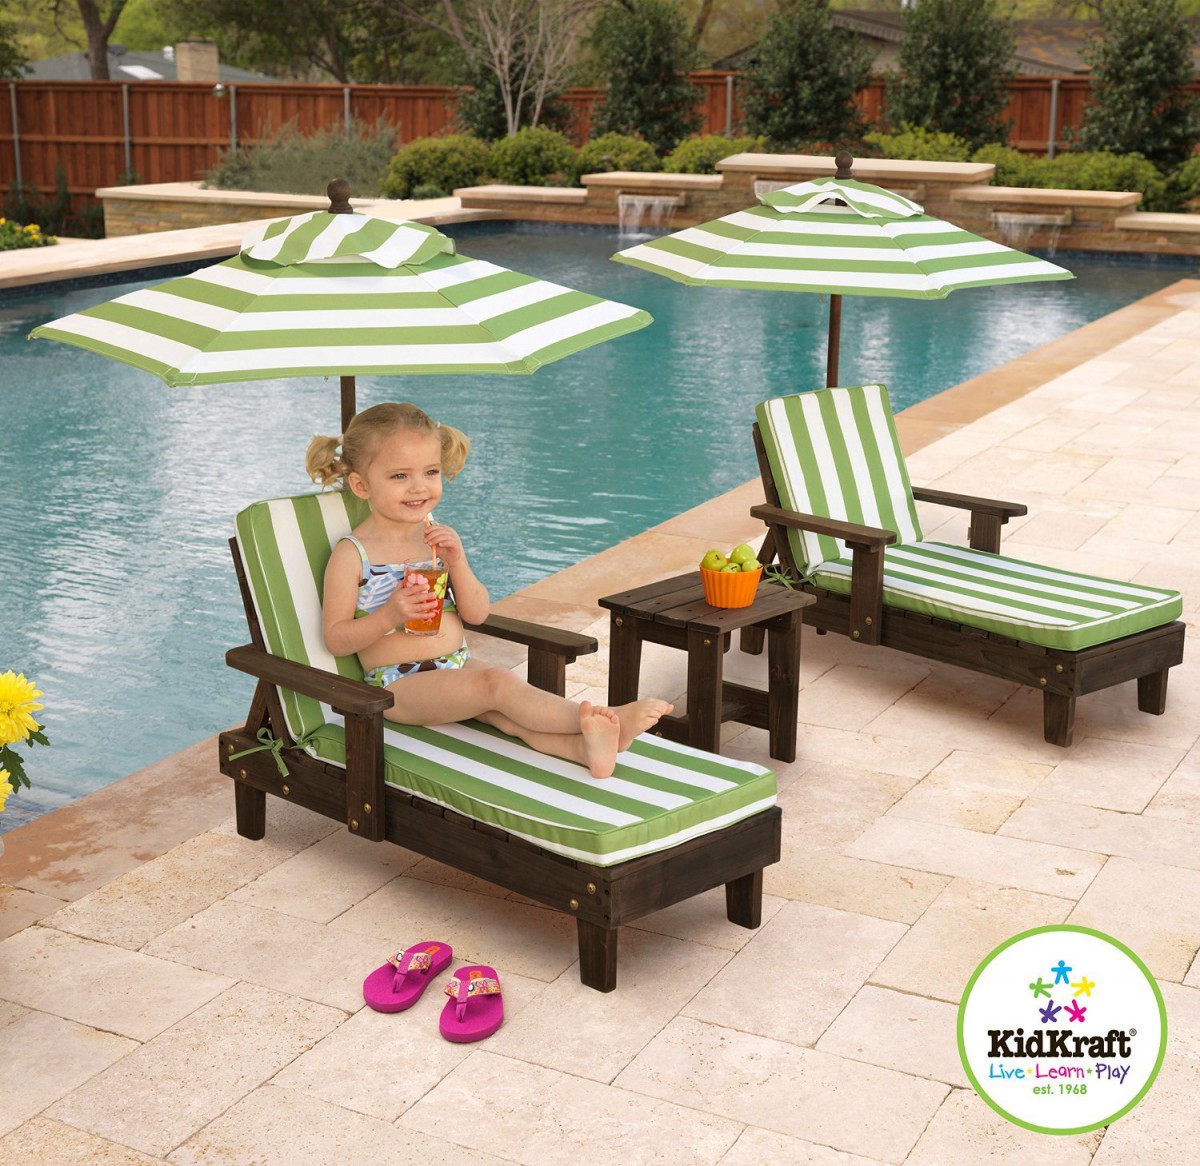 KidKraft Outdoor Chaise Lounge Chairs and Umbrella Set